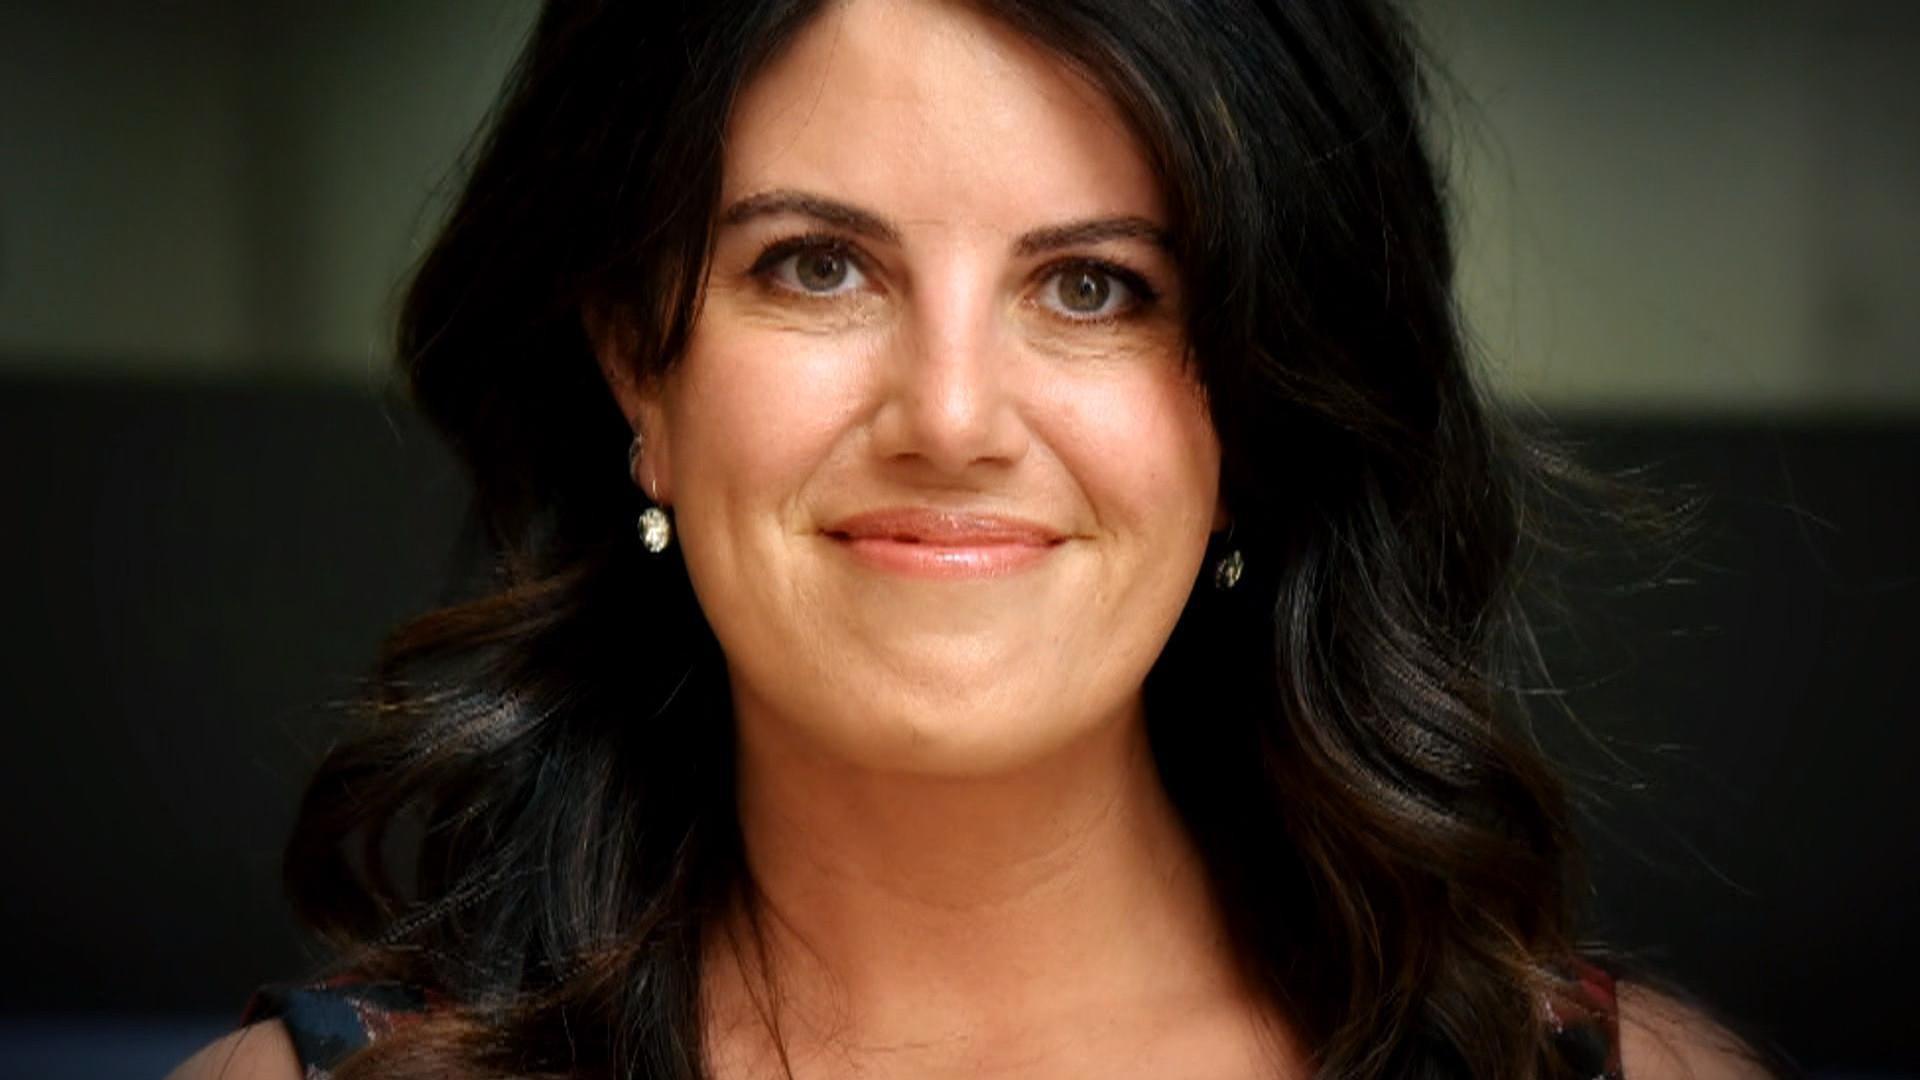 Monica Lewinsky responds to President Clinton’s #MeToo comments.